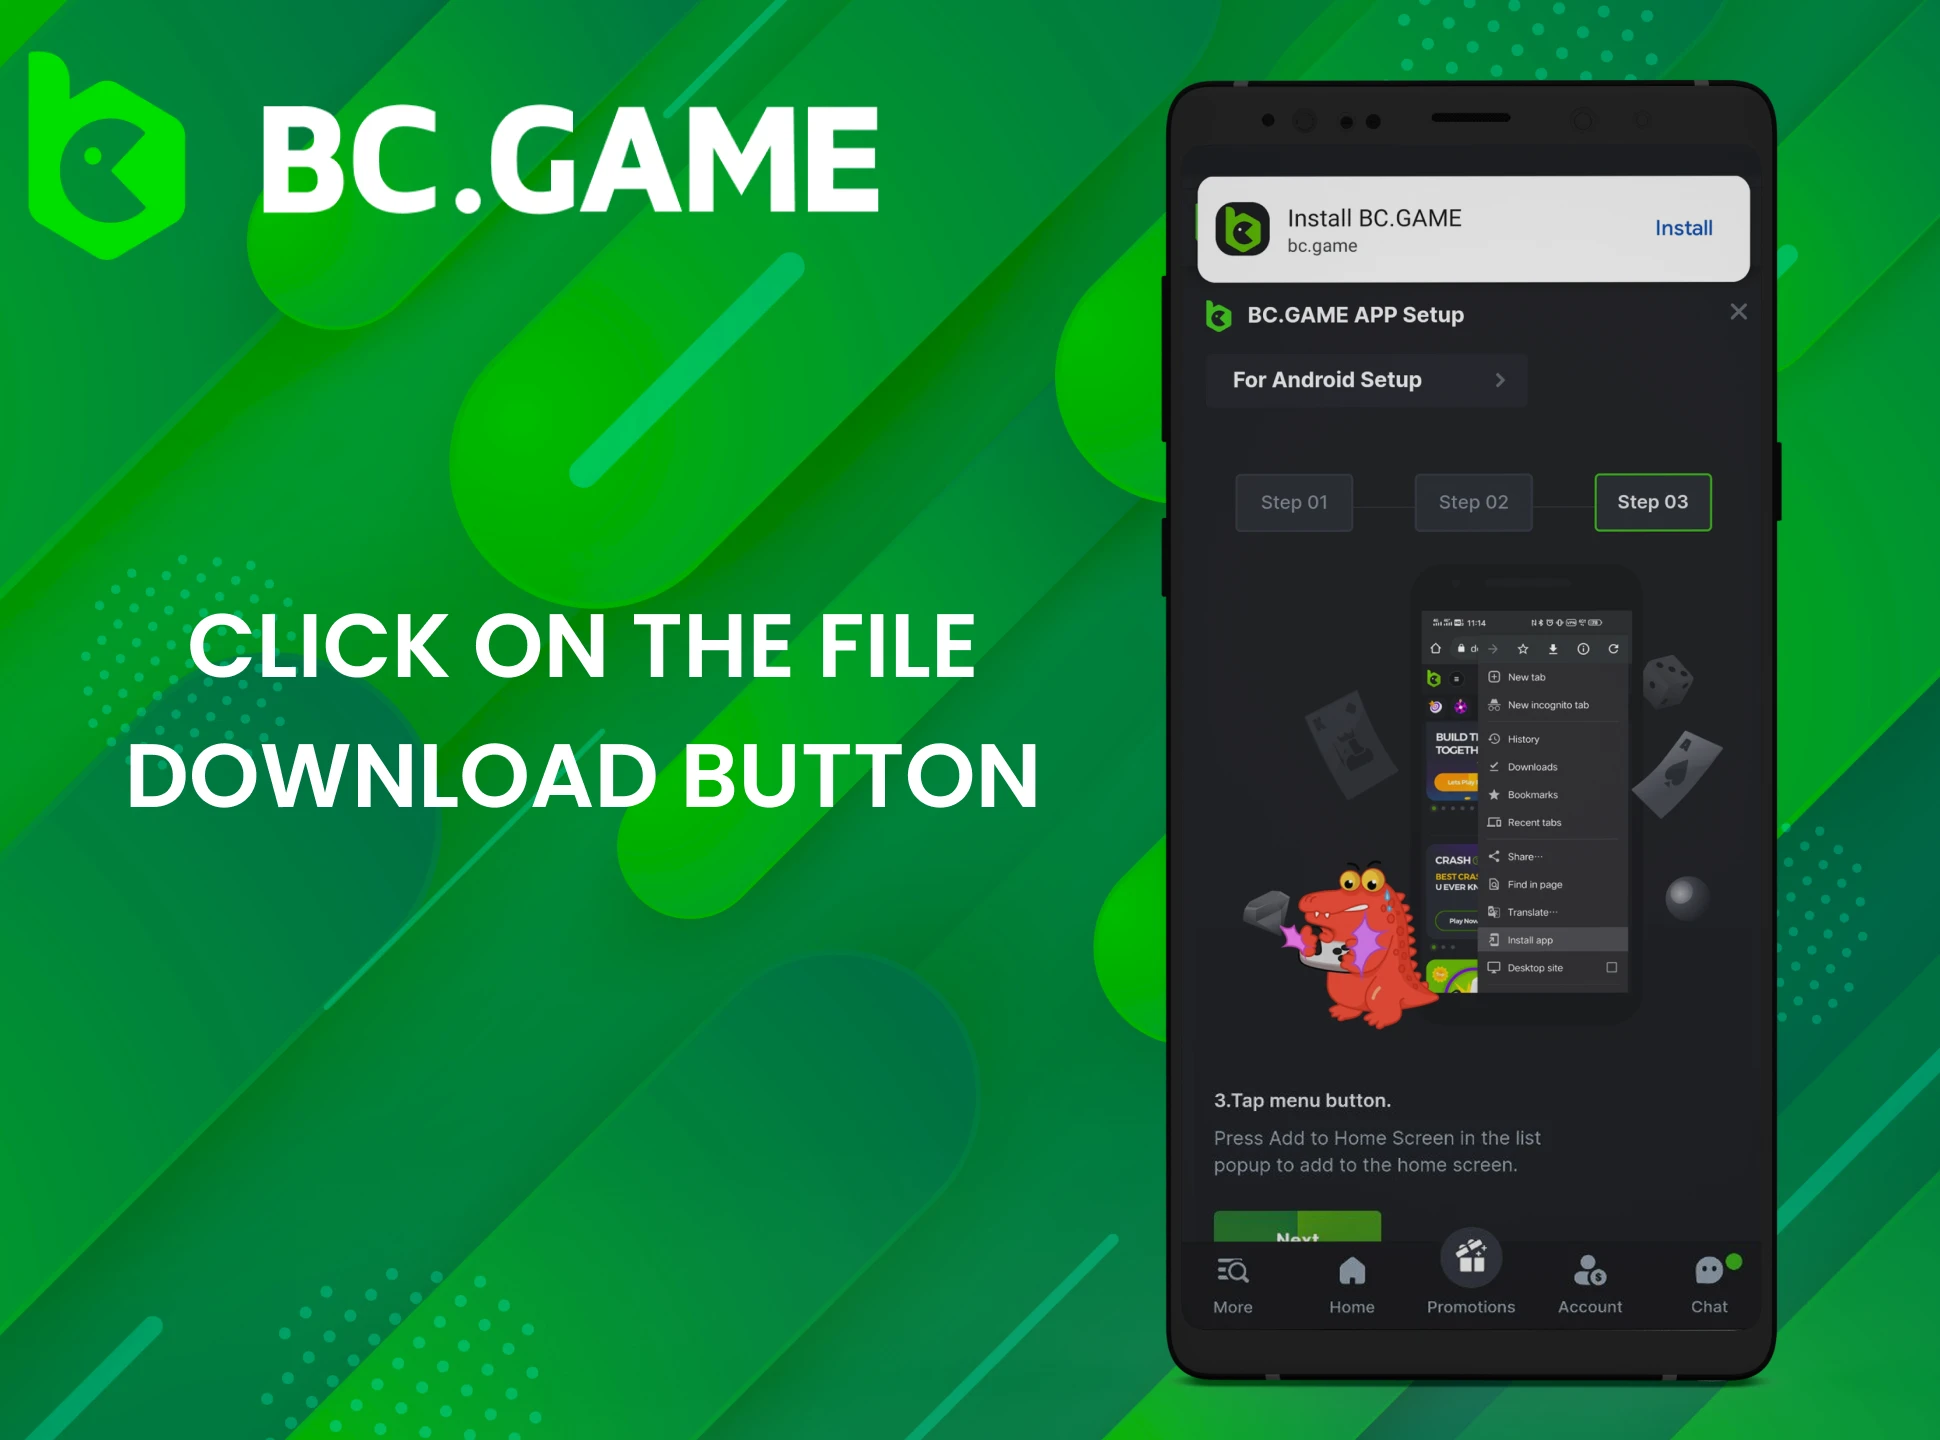 Download the BC Game app from its website.